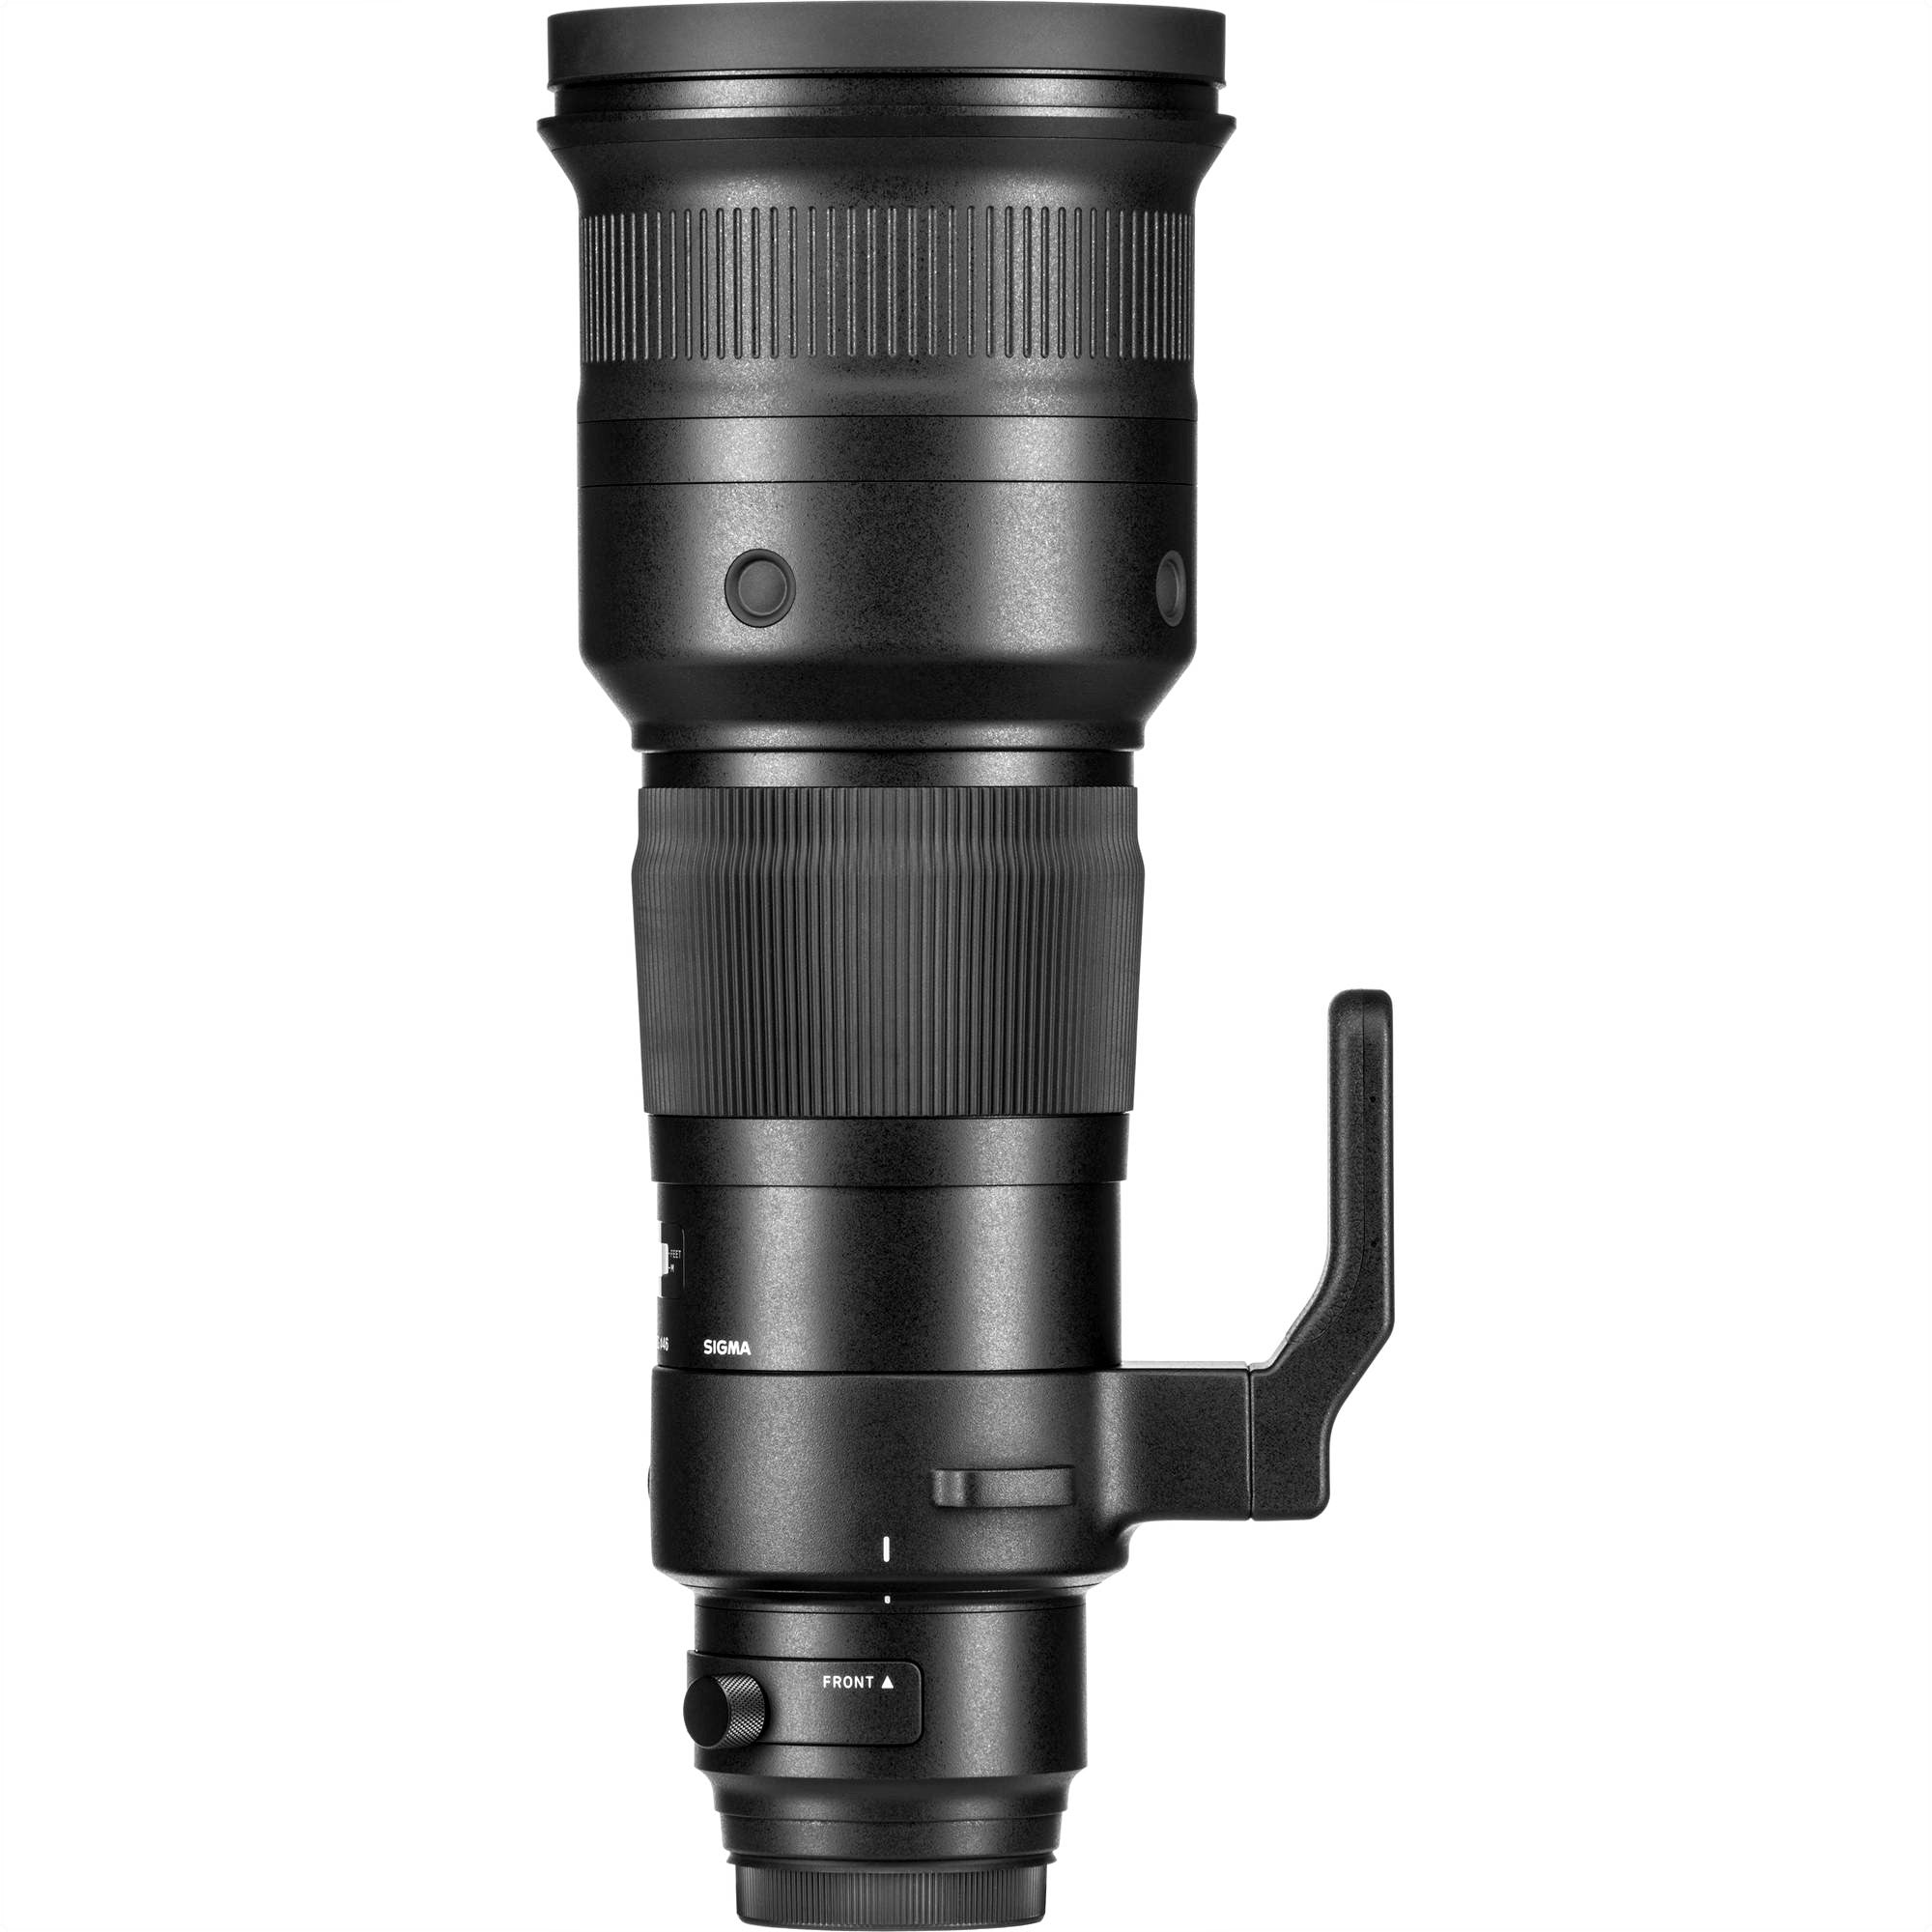 Sigma 500mm F4.0 DG OS HSM Sports Lens for Canon EF